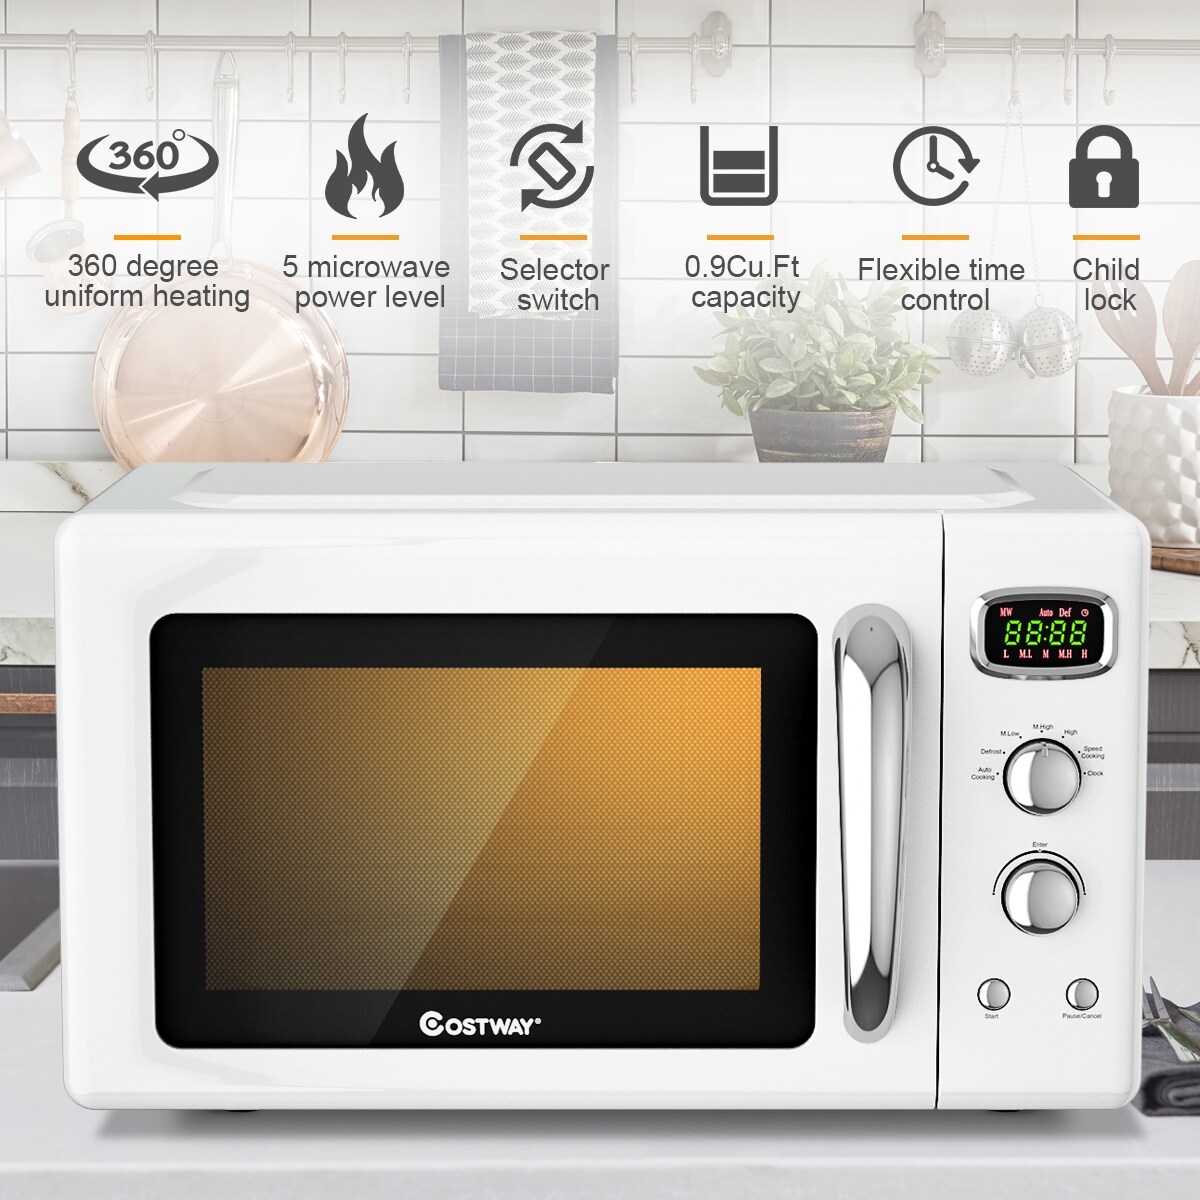 Countertop Microwave Oven with Compact Size, Position-Memory Turntable,  Sound On/Off Button, Child Safety Lock and ECO Mode, 0.7Cu.ft/700W, Cream 